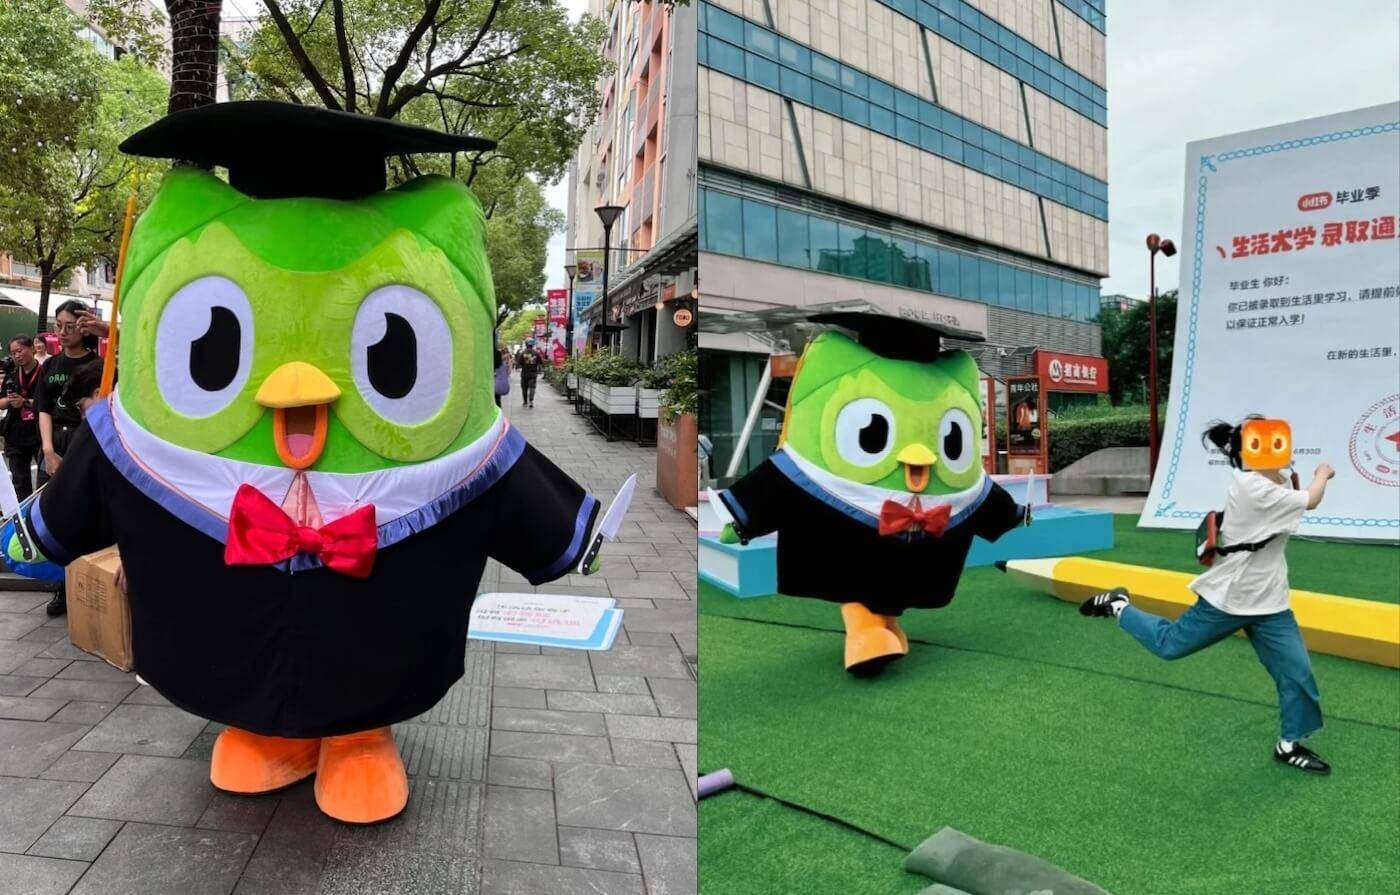 Duo the Owl posing in one photo, and chasing a student in the other 